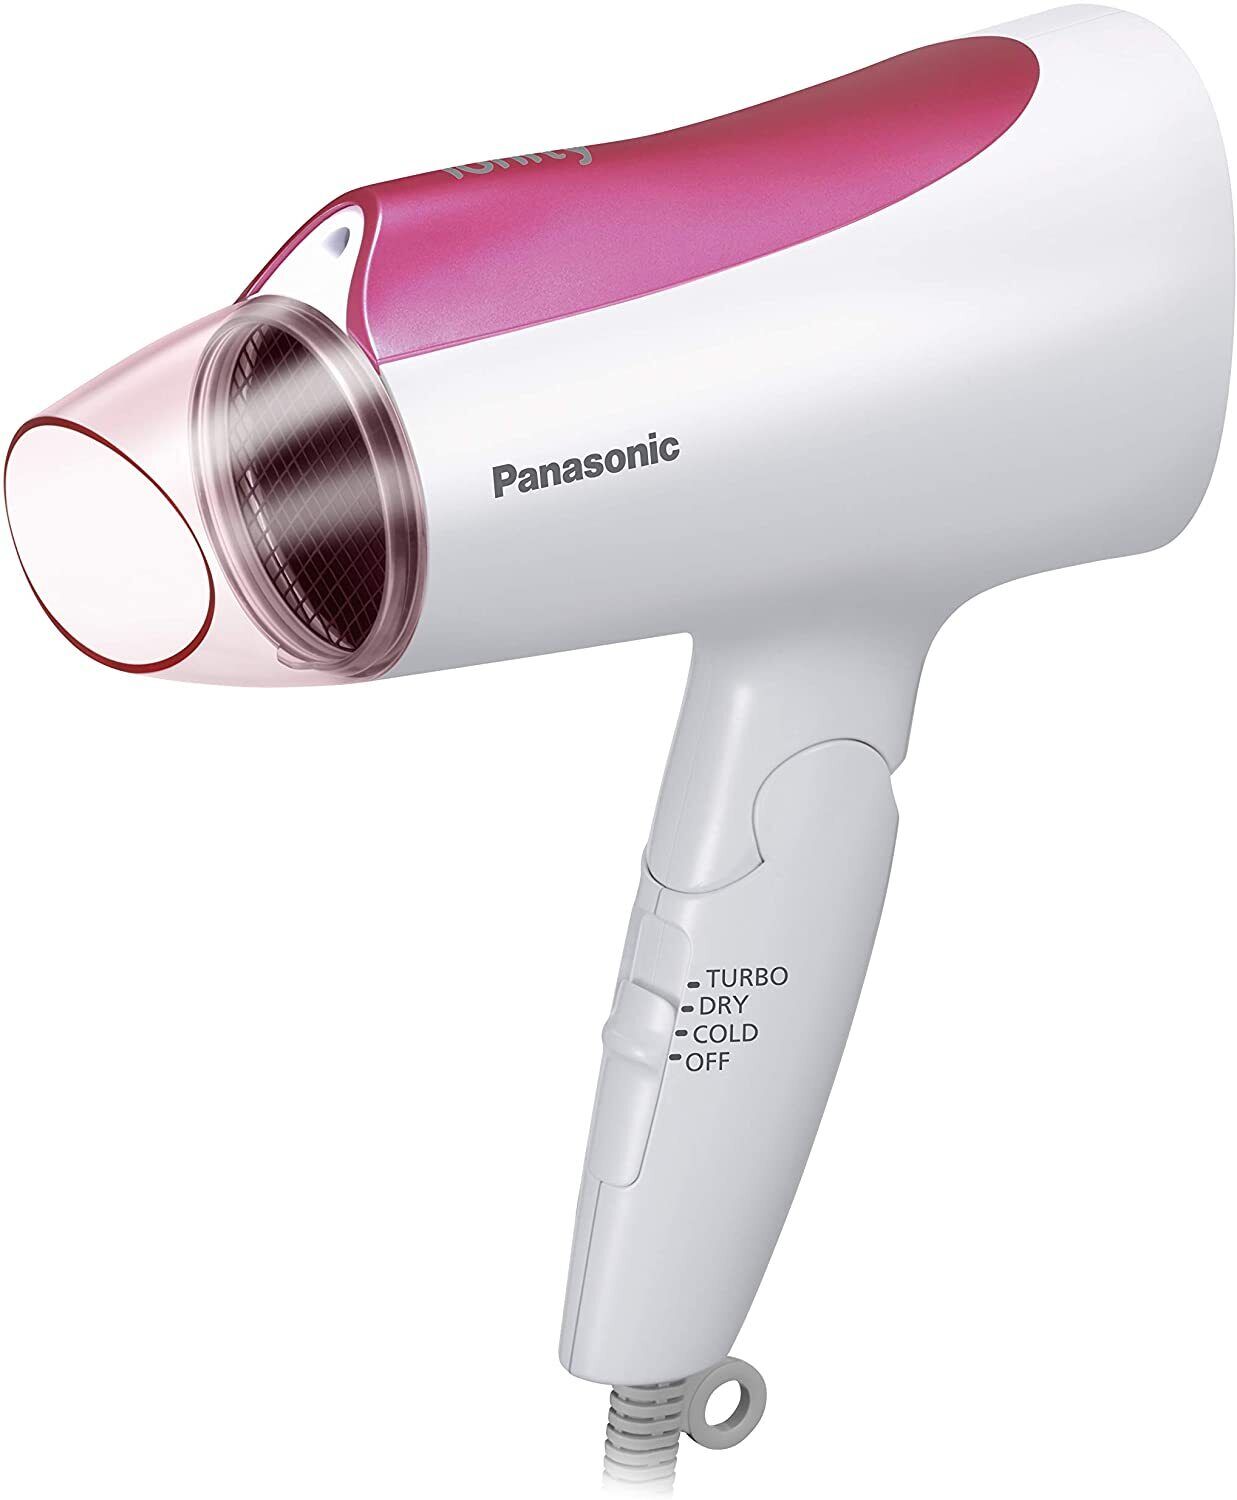 Mua Panasonic Nanoe Hair Dryer, 1875 Watt Professional Blow Dryer for  Smooth, Shiny Hair with 3 Attachments Quick Dry Nozzle, Diffuser and  Concentrator Nozzle – EH-NA65-K (Black/Pink), Black trên Amazon Mỹ chính